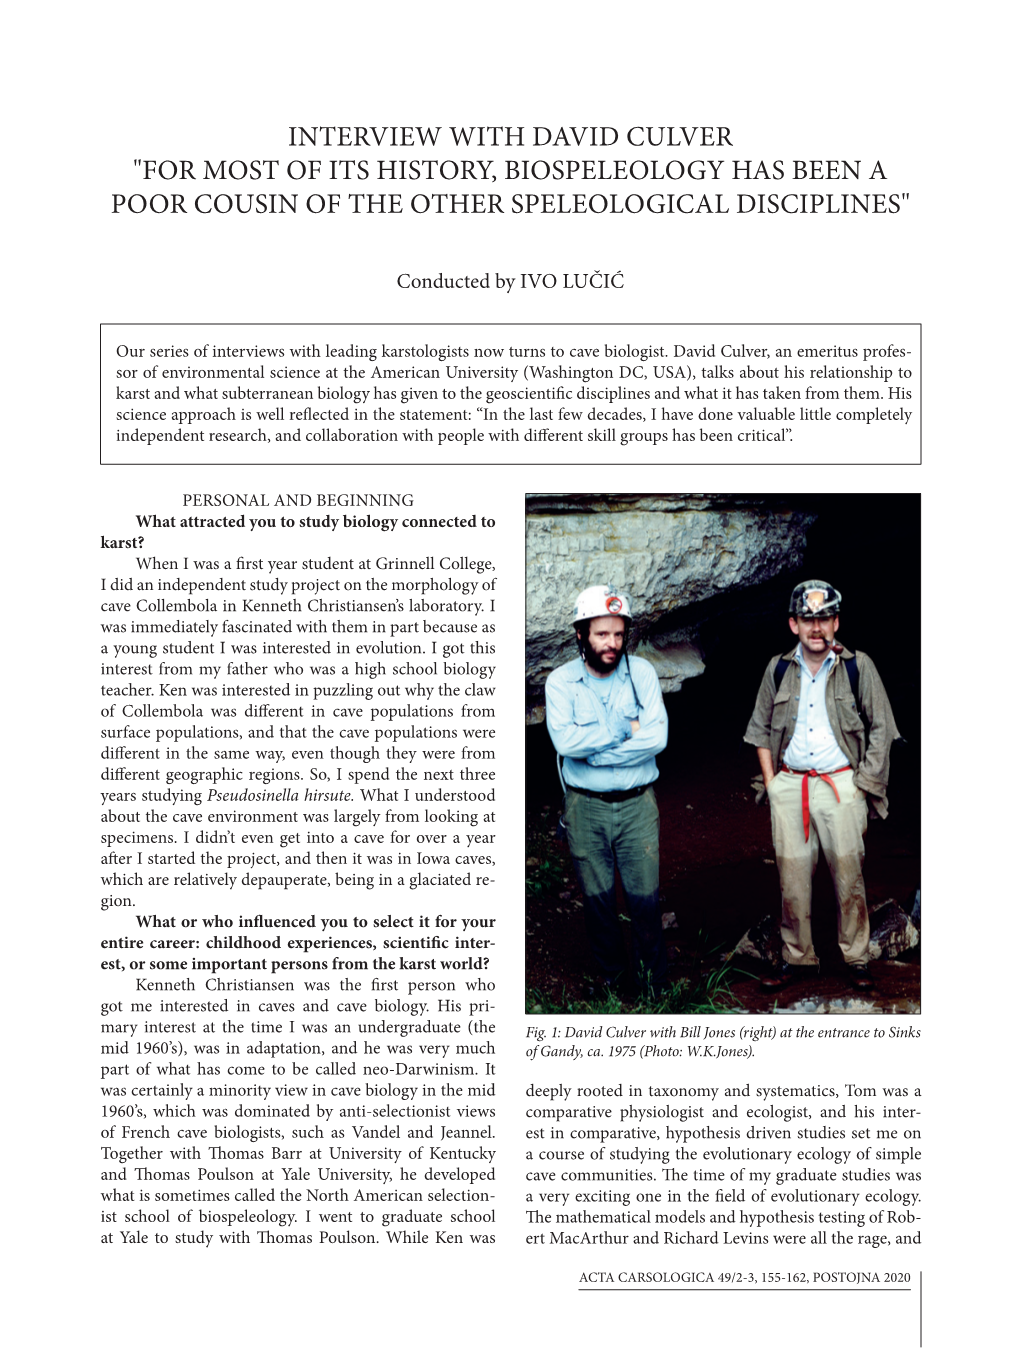 Interview with David Culver "For Most of Its History, Biospeleology Has Been a Poor Cousin of the Other Speleological Disciplines"